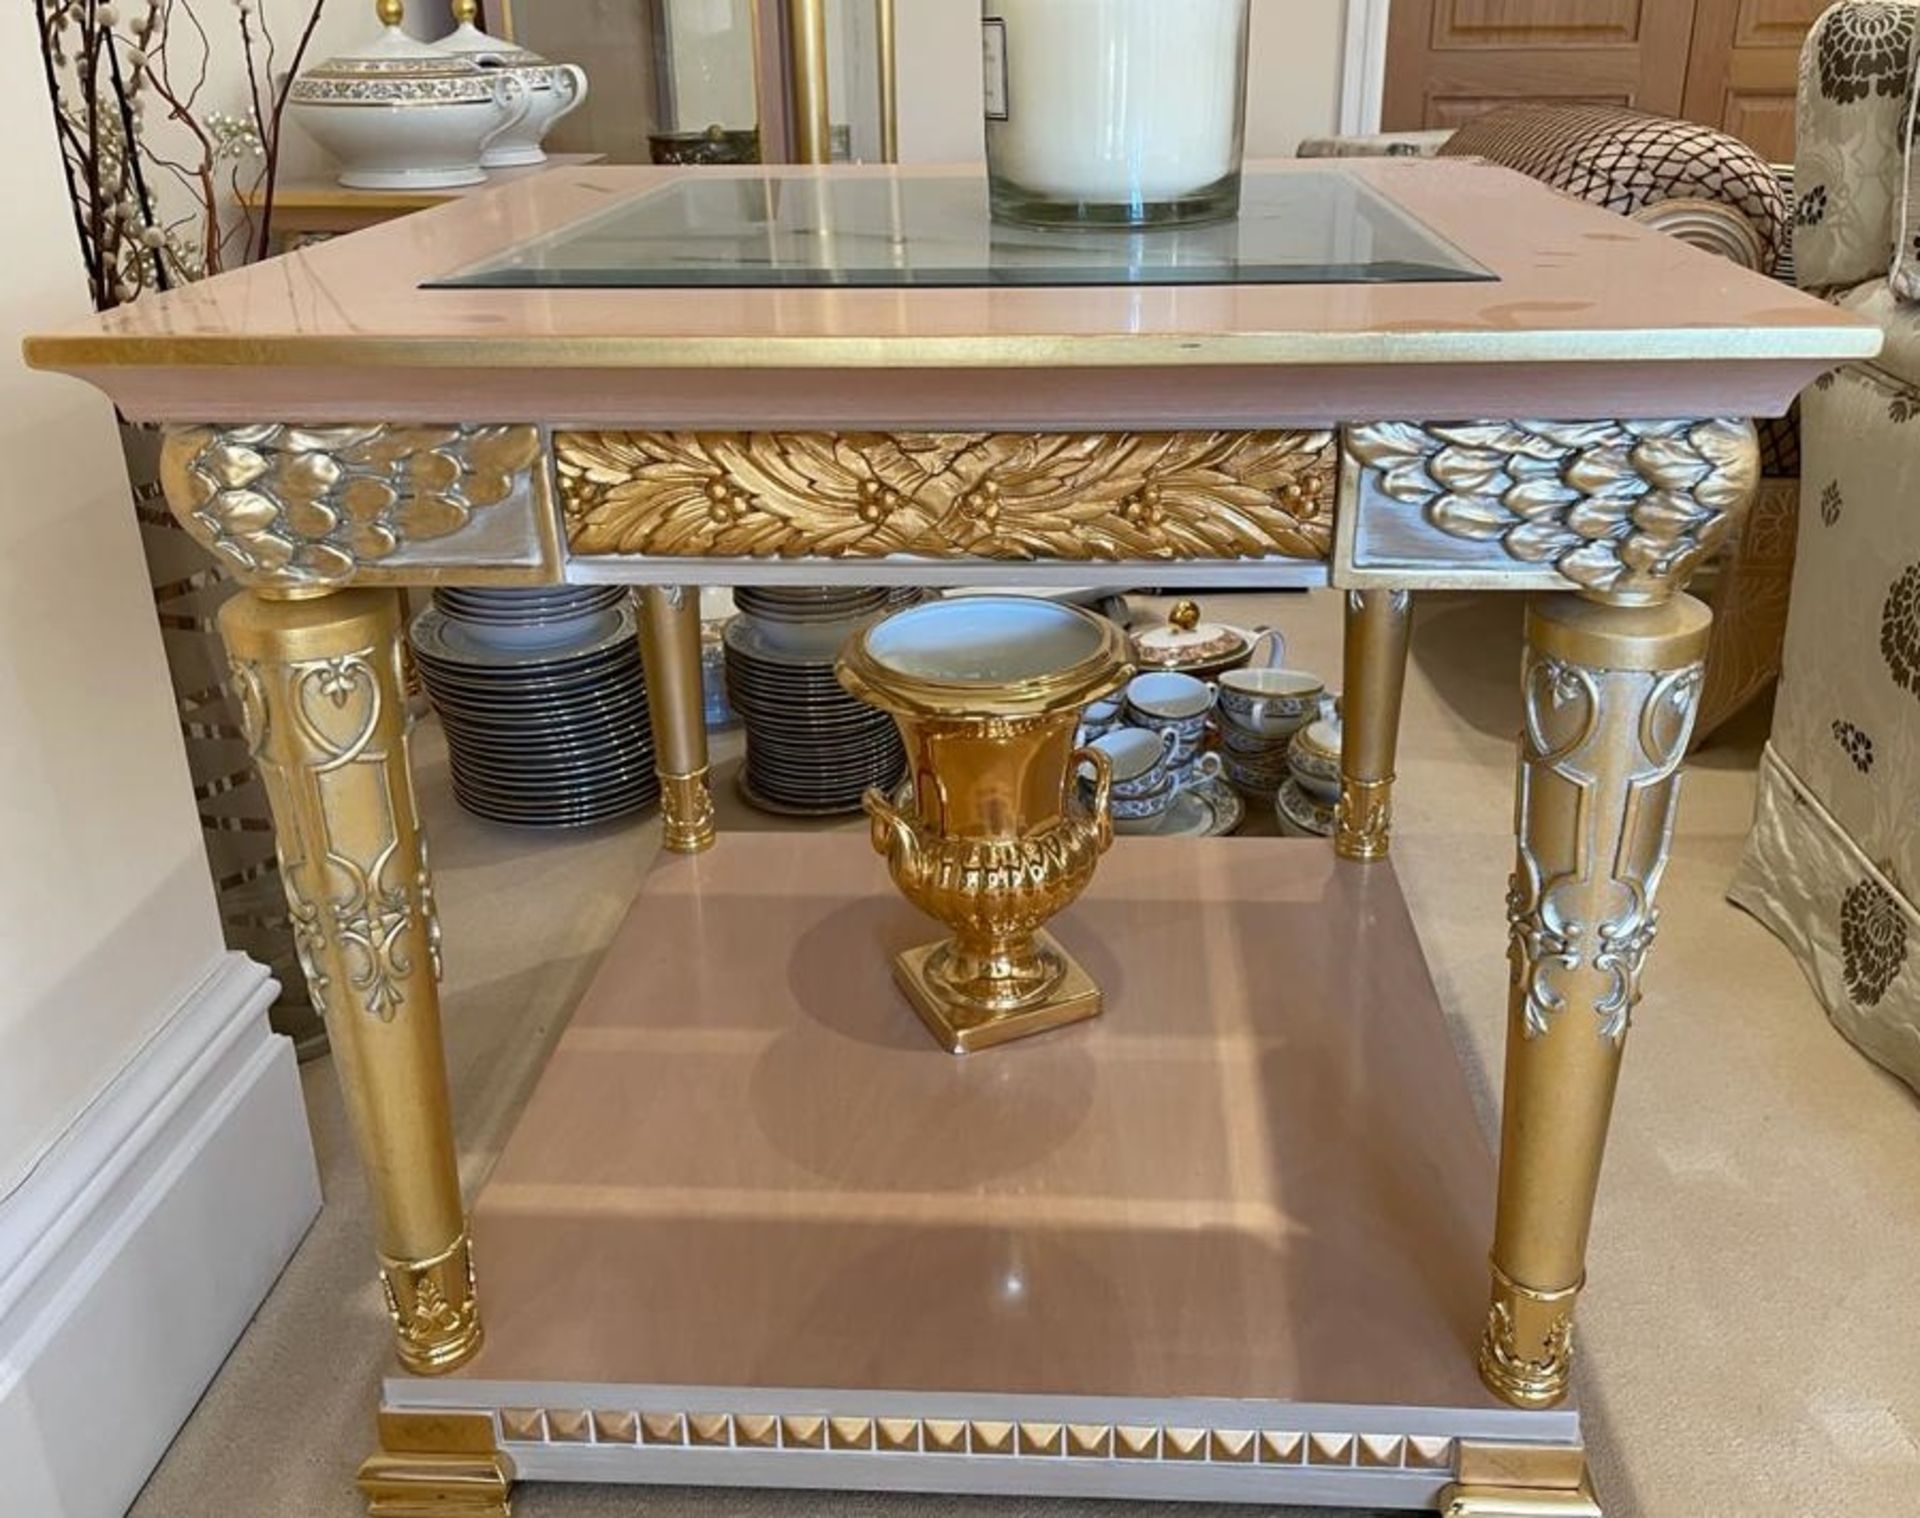 2 x Hand Carved Ornate Side Tables Complimented With Birchwood Veneer, Golden Pillar Legs, Carved - Image 9 of 13